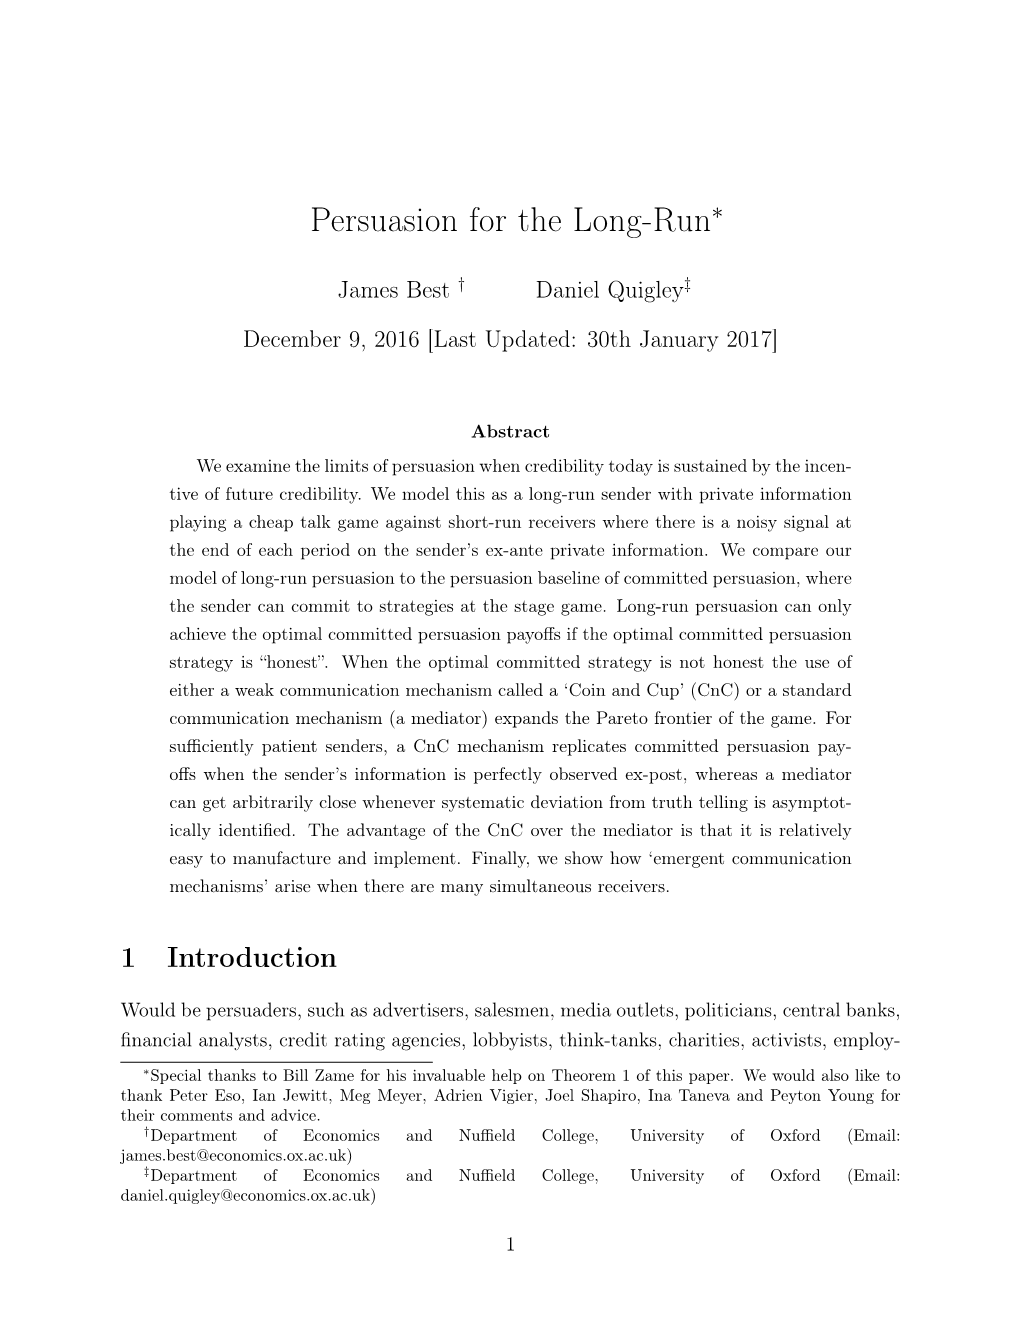 Persuasion for the Long-Runspecial Thanks to Bill Zame for His Invaluable Help on Theorem 1 of This Paper. We Would Also Like To